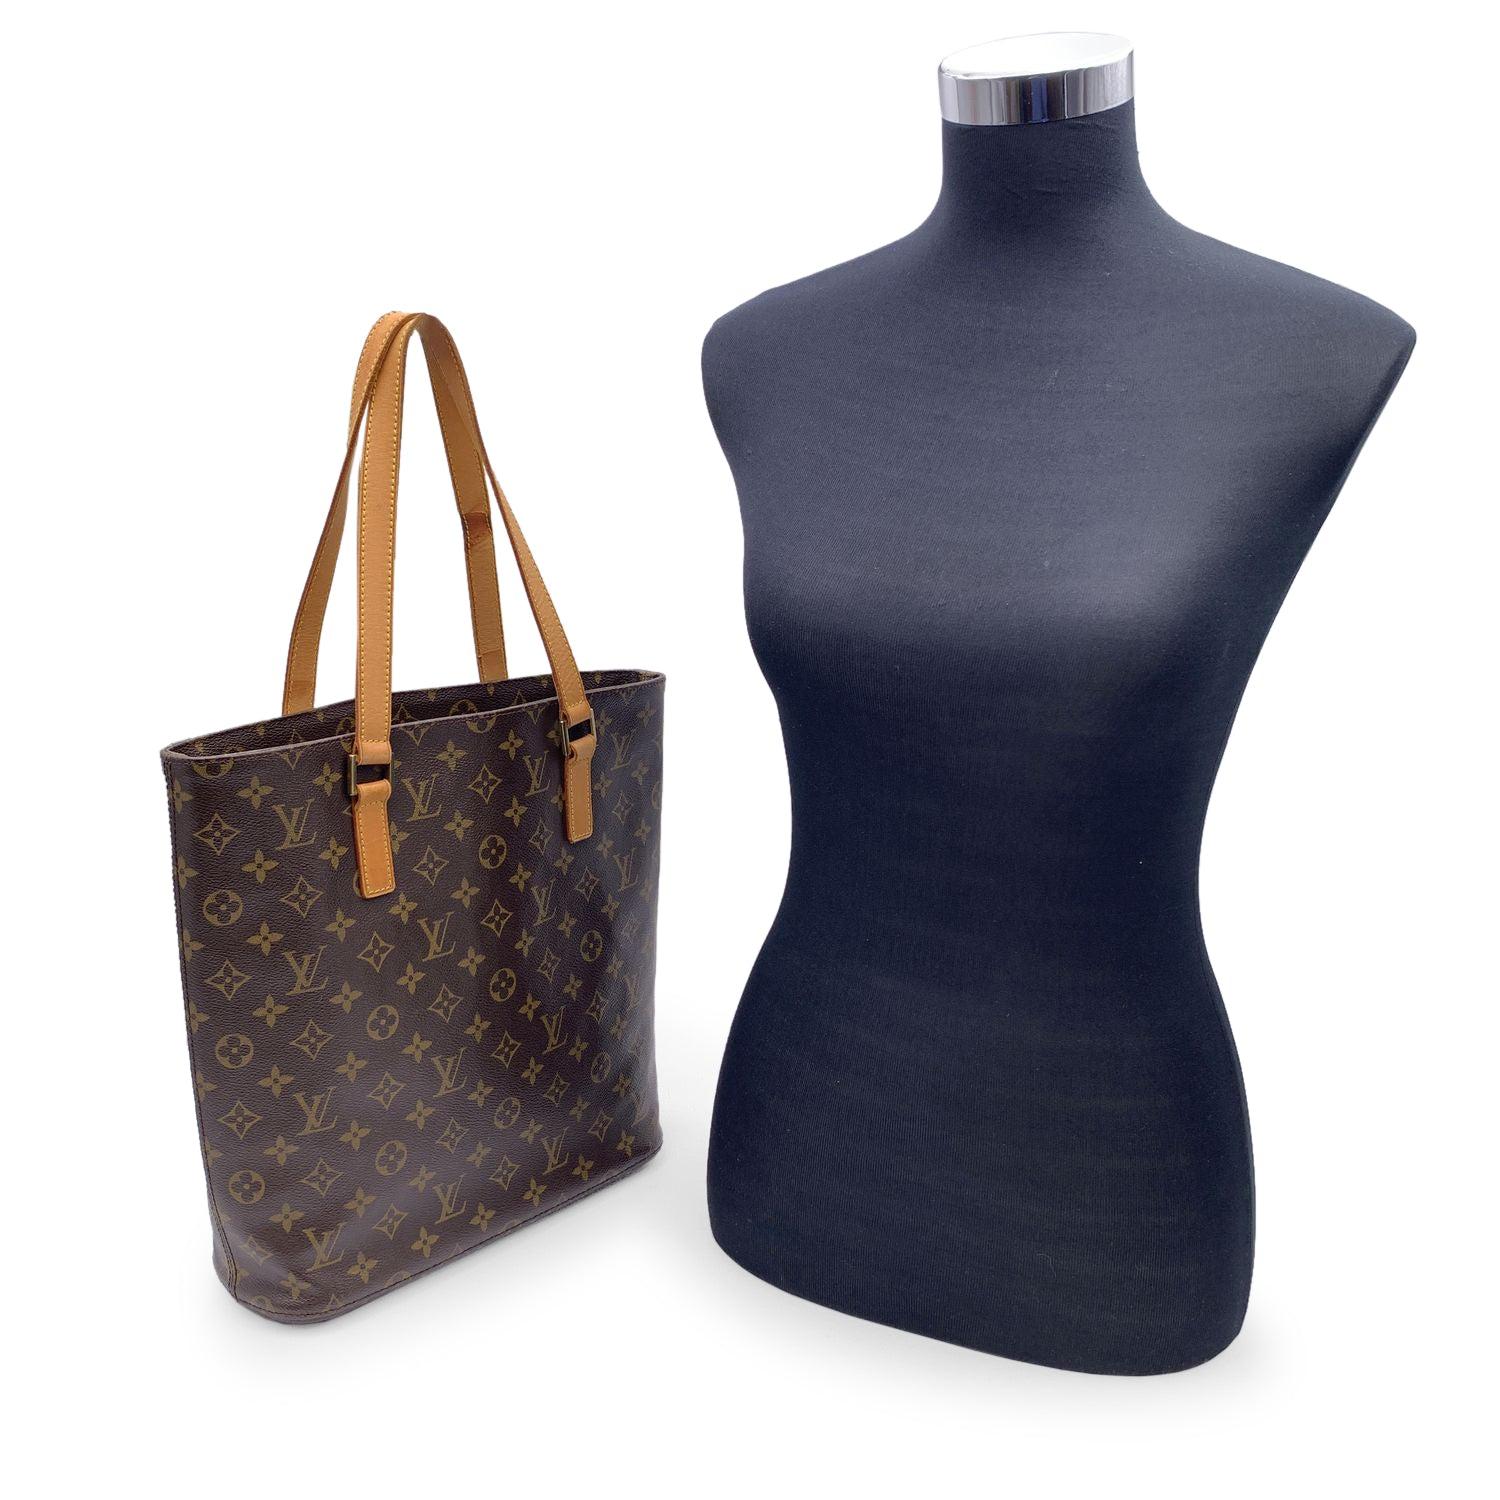 Louis Vuitton Monogram Canvas Vavin GM Tote Shoulder Bag. Leather handles. Open top. Portitioned cocoa fabric lining with a zipper pocket. Golden brass pieces. 1 interior zip pocket and 2 side open pockets inside. D ring inside. 'LOUIS VUITTON Paris